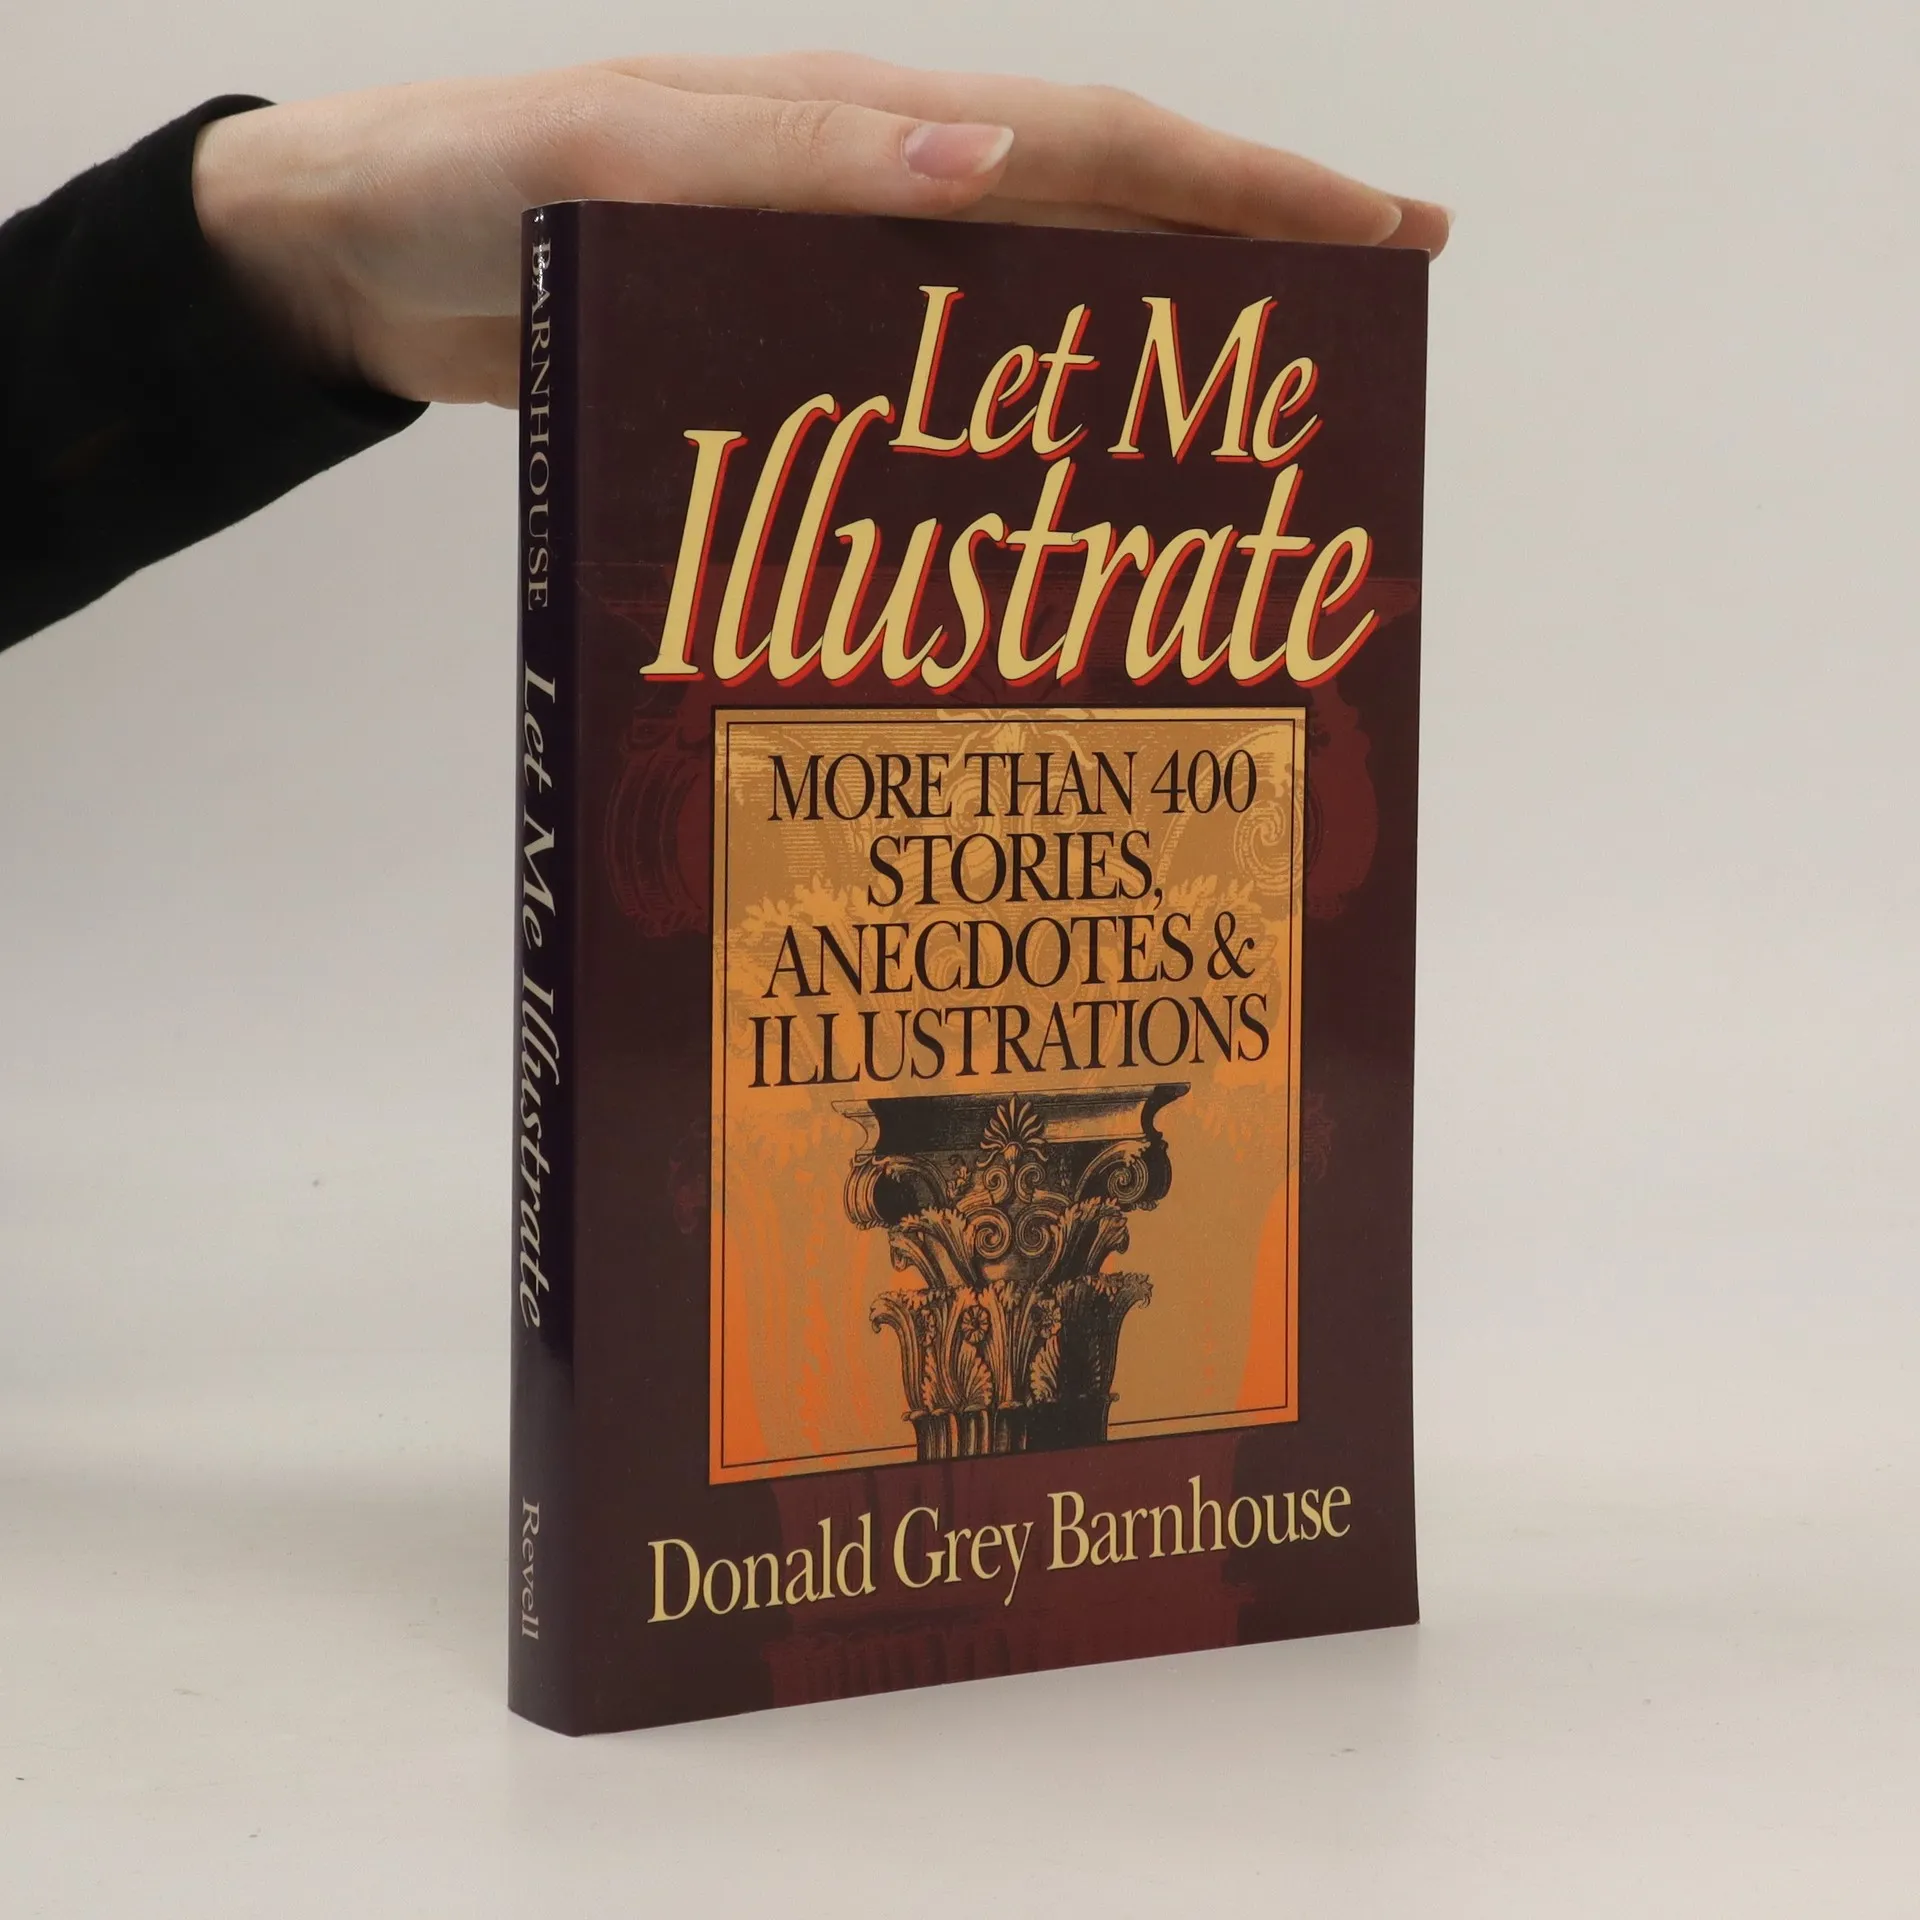 Let Me Illustrate: More Than 400 Stories, Anecdotes & Illustrations:  Barnhouse, Donald Grey: 9780800755089: : Books